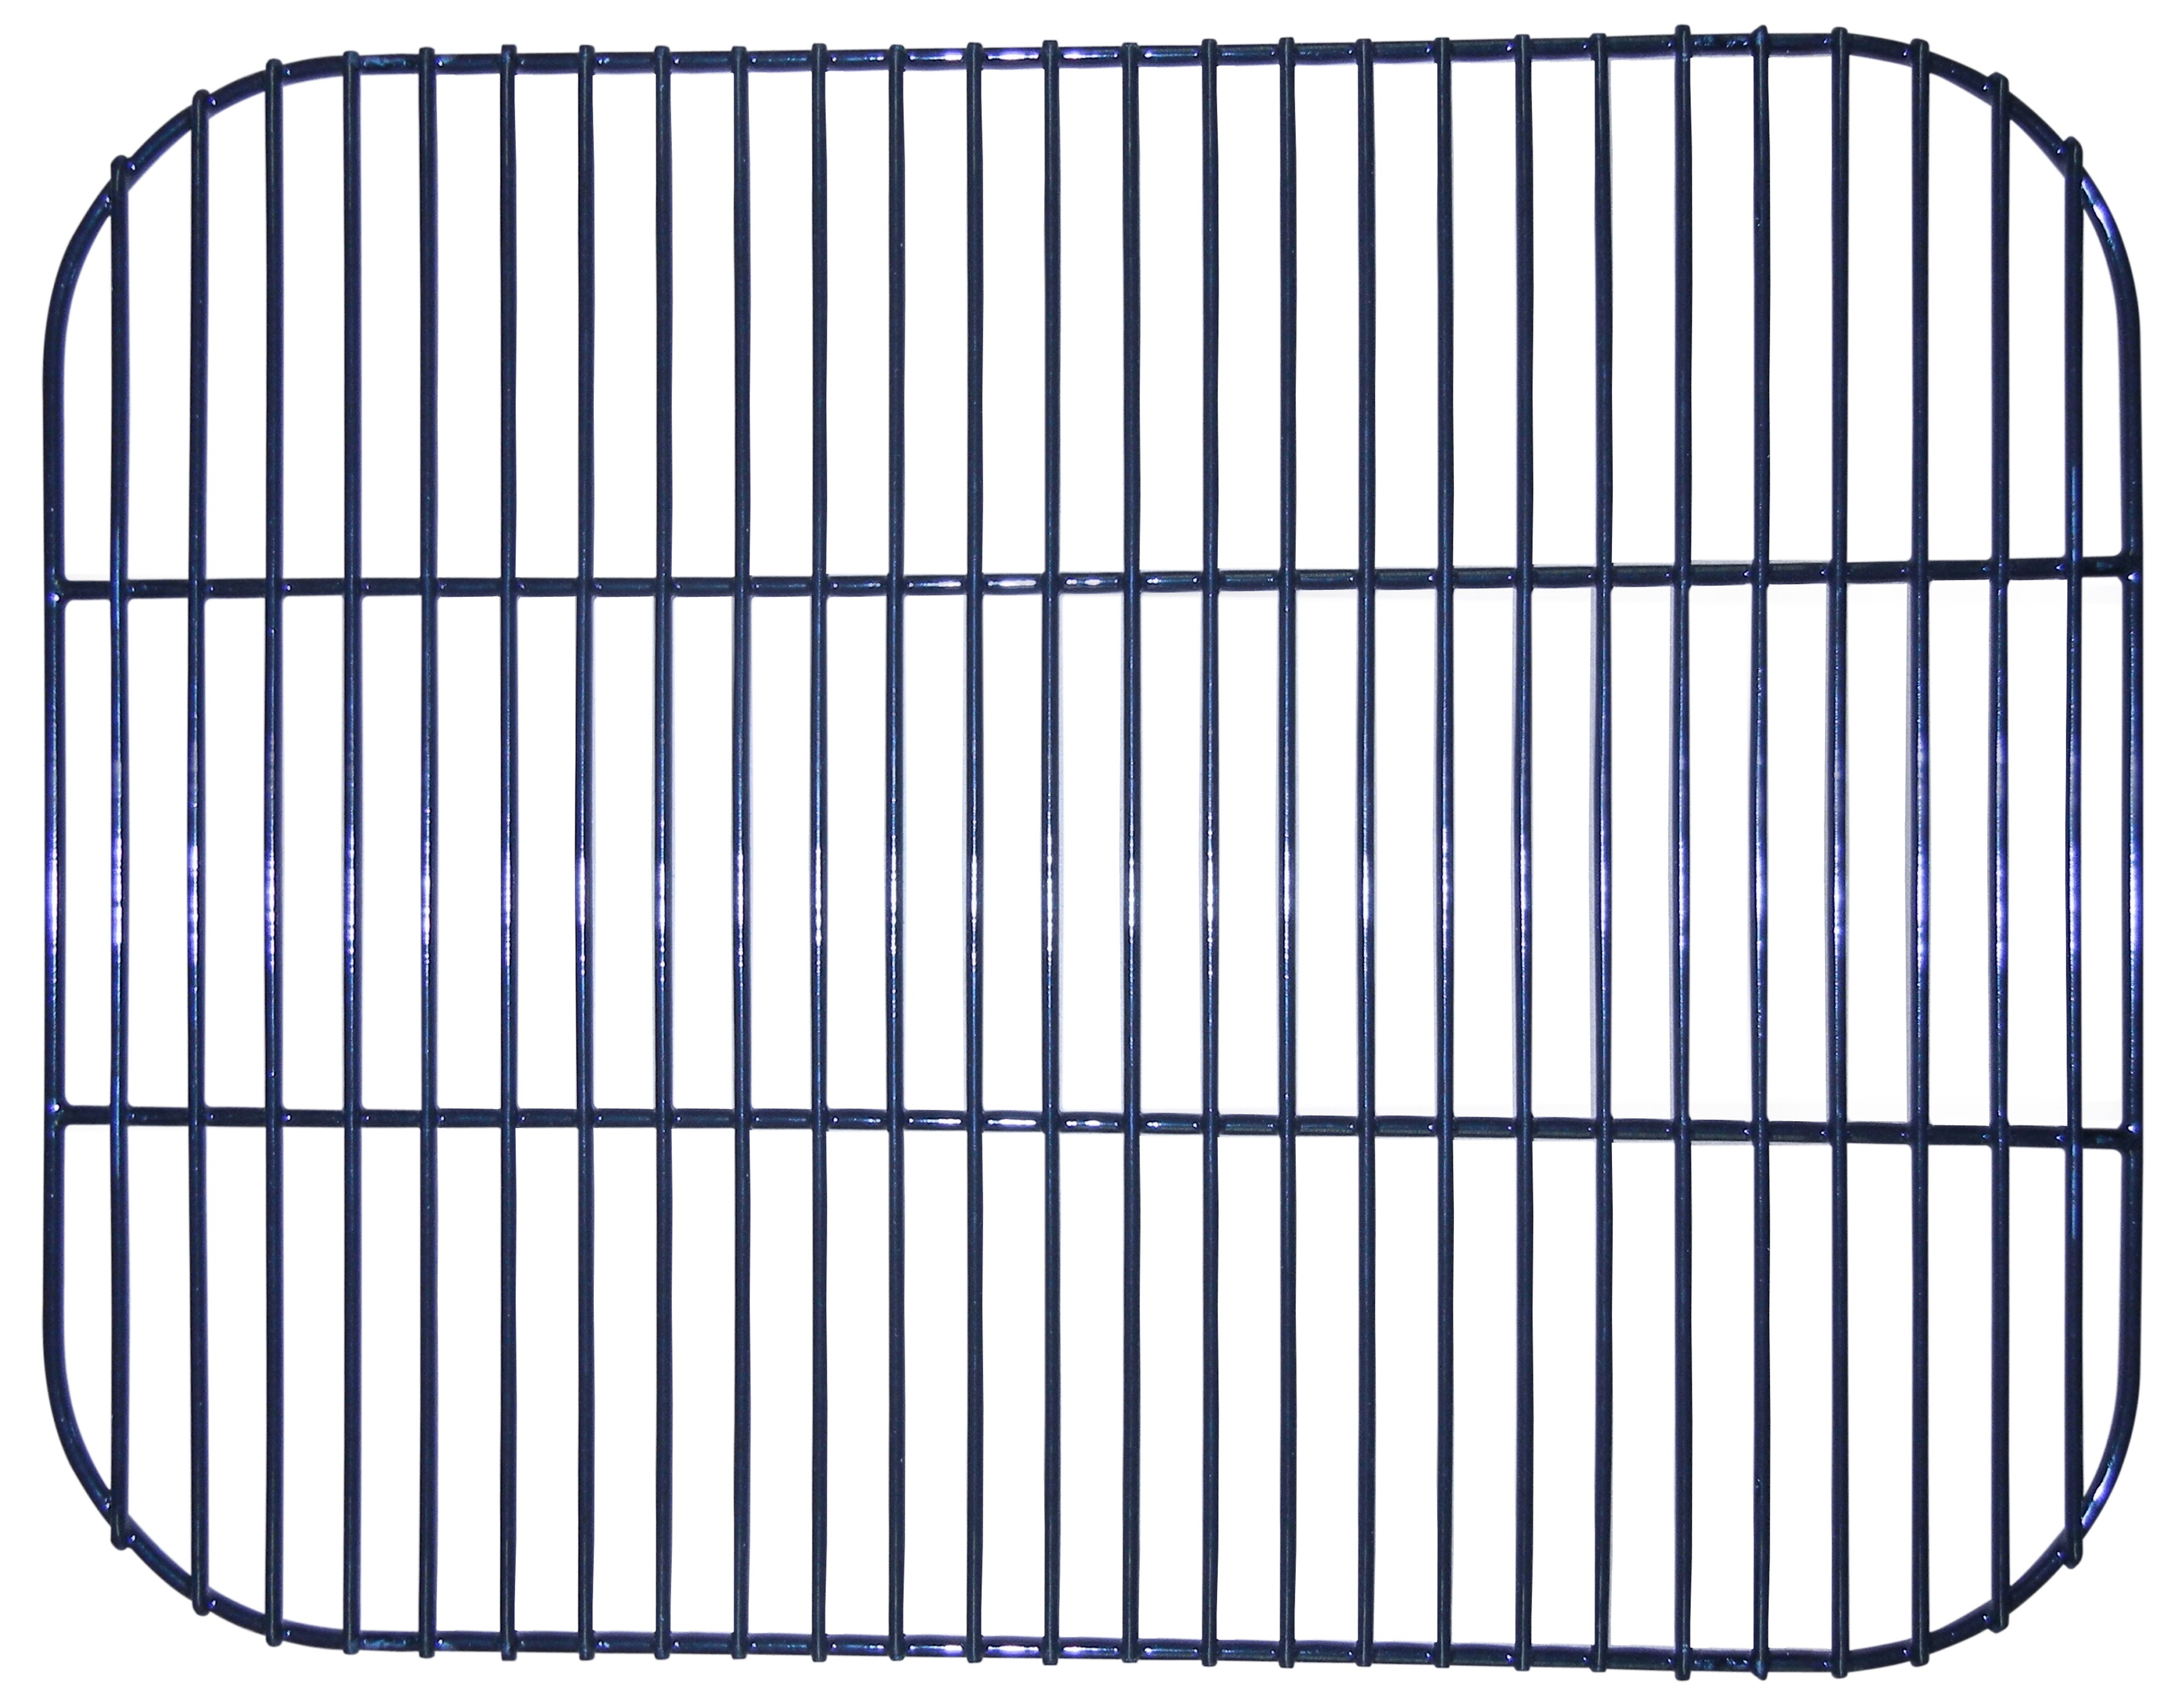 16-11/16" X 21-3/4" Porcelain Steel Wire Cooking Grid